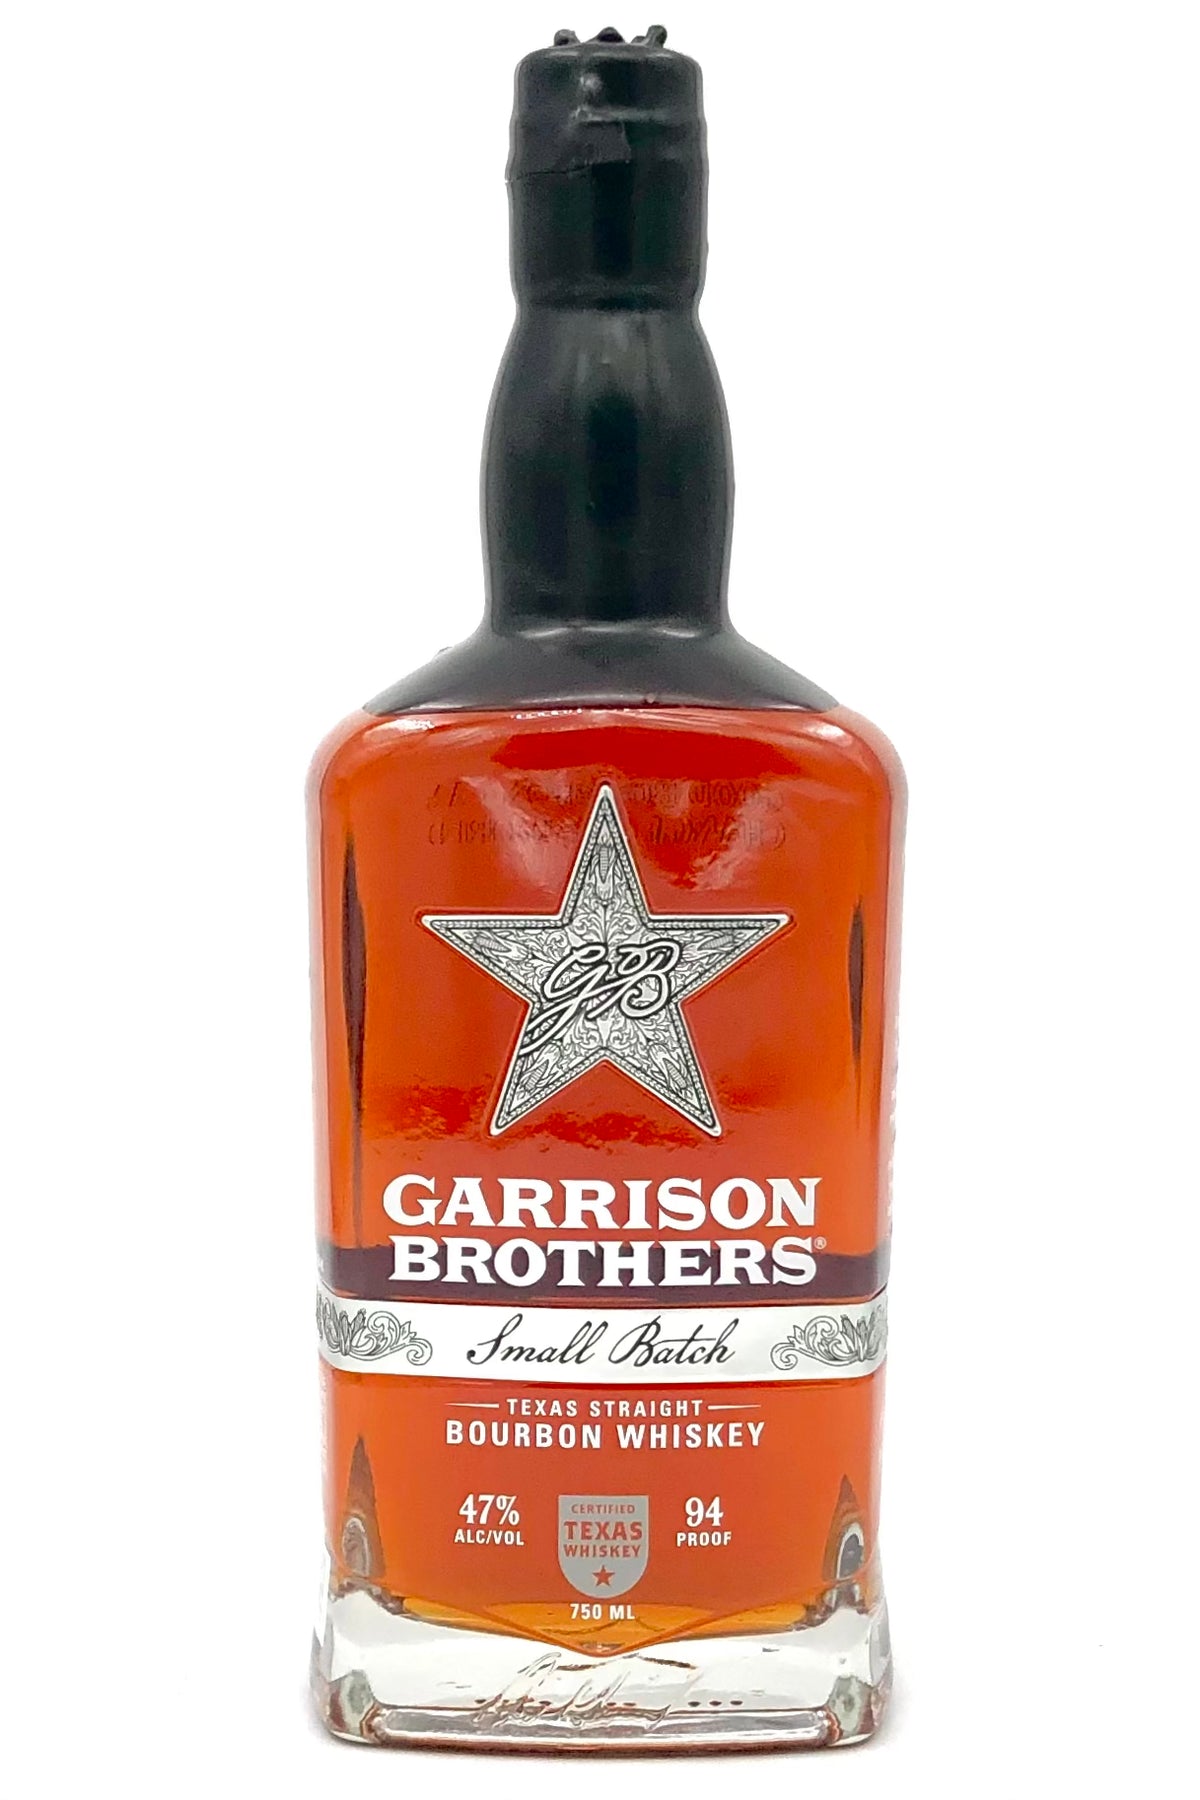 Garrison Brothers Small Batch Texas Straight Bourbon Whiskey